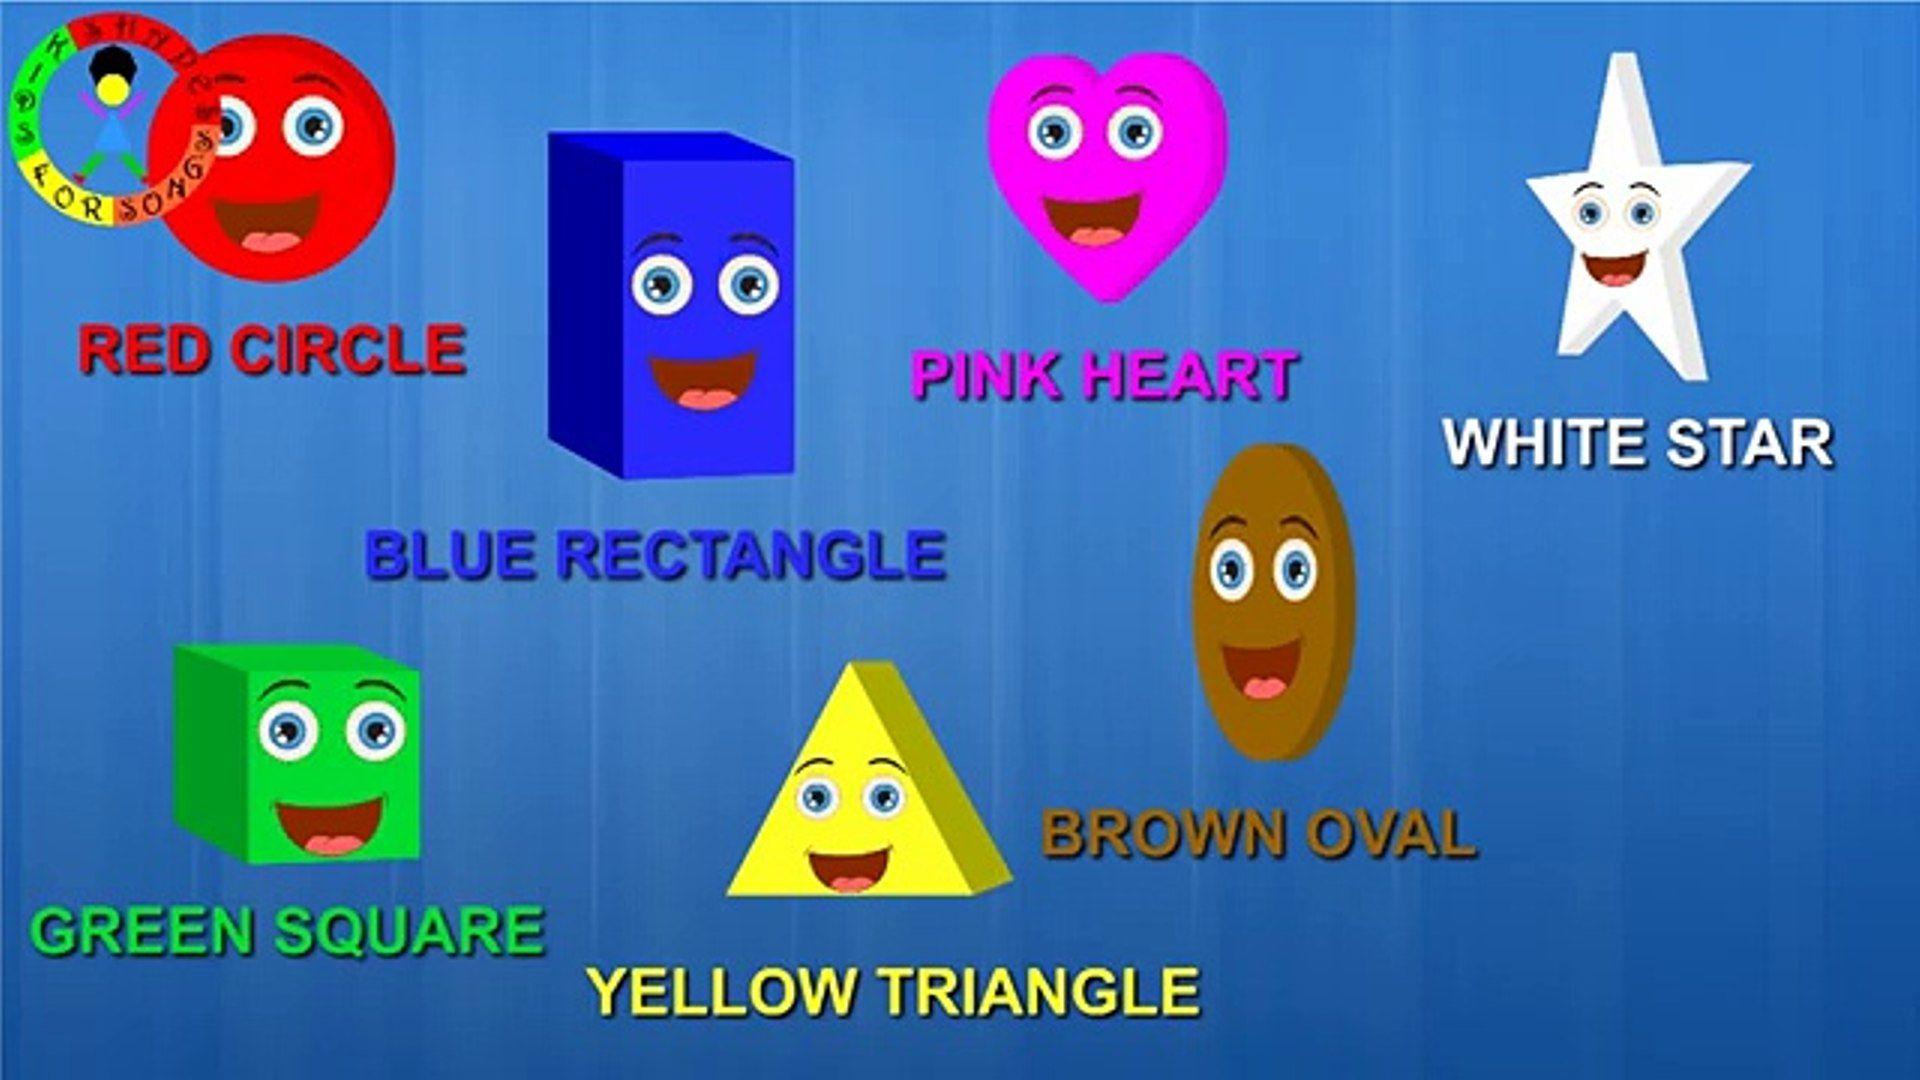 Blue Square Yellow Oval Logo - Shapes Colors Song. The Shapes Song. Learn Shapes And Colors Song